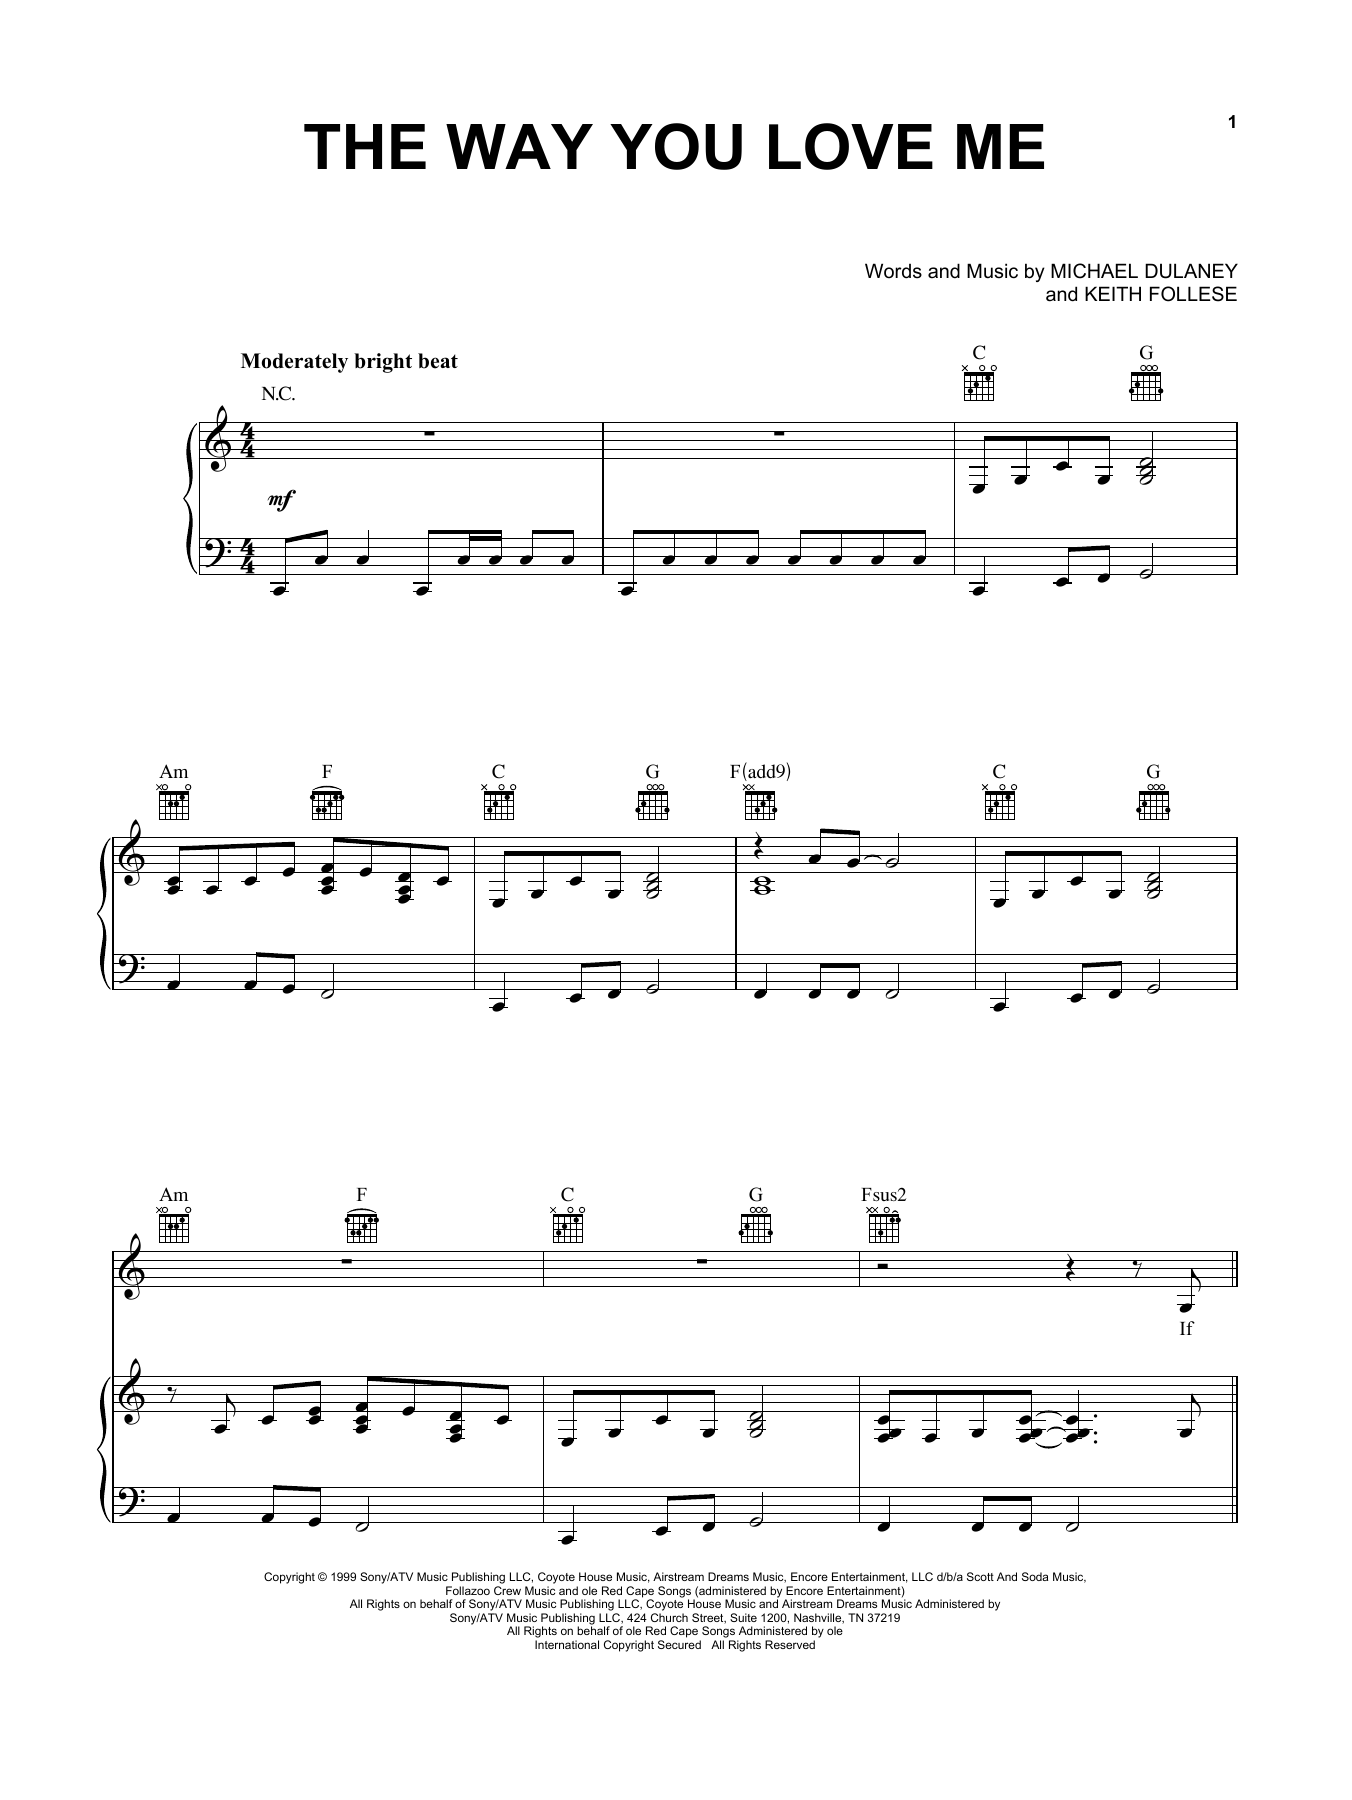 Faith Hill The Way You Love Me sheet music notes and chords. Download Printable PDF.